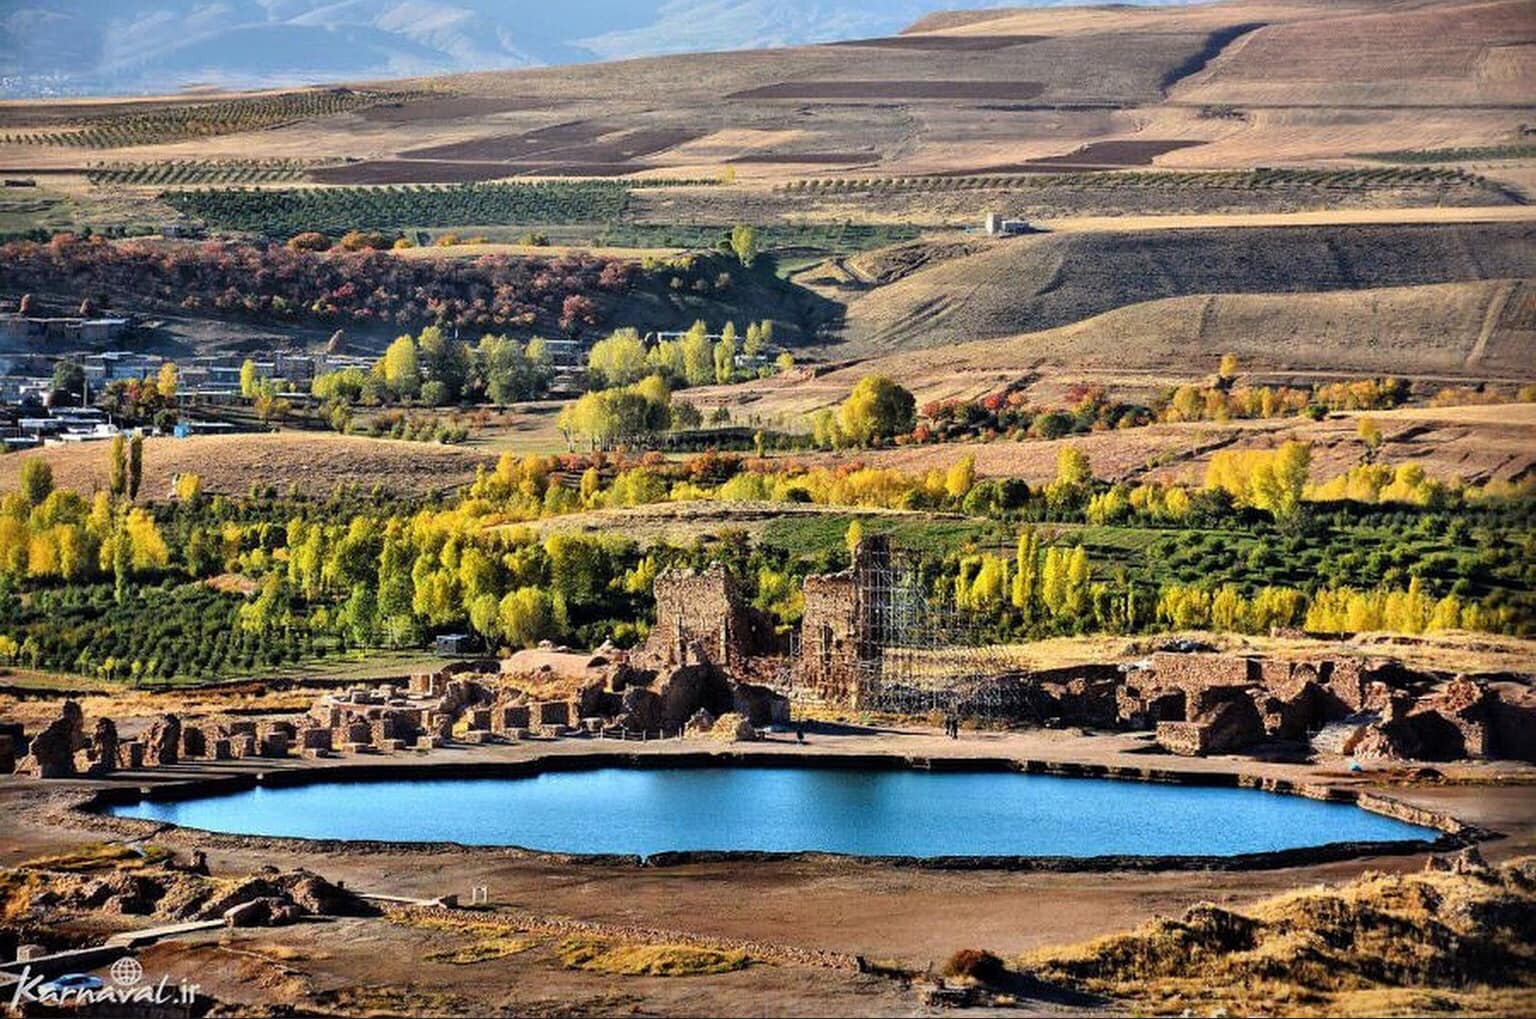 Takht-e Suleiman: A Captivating Remnant of Ancient Persia